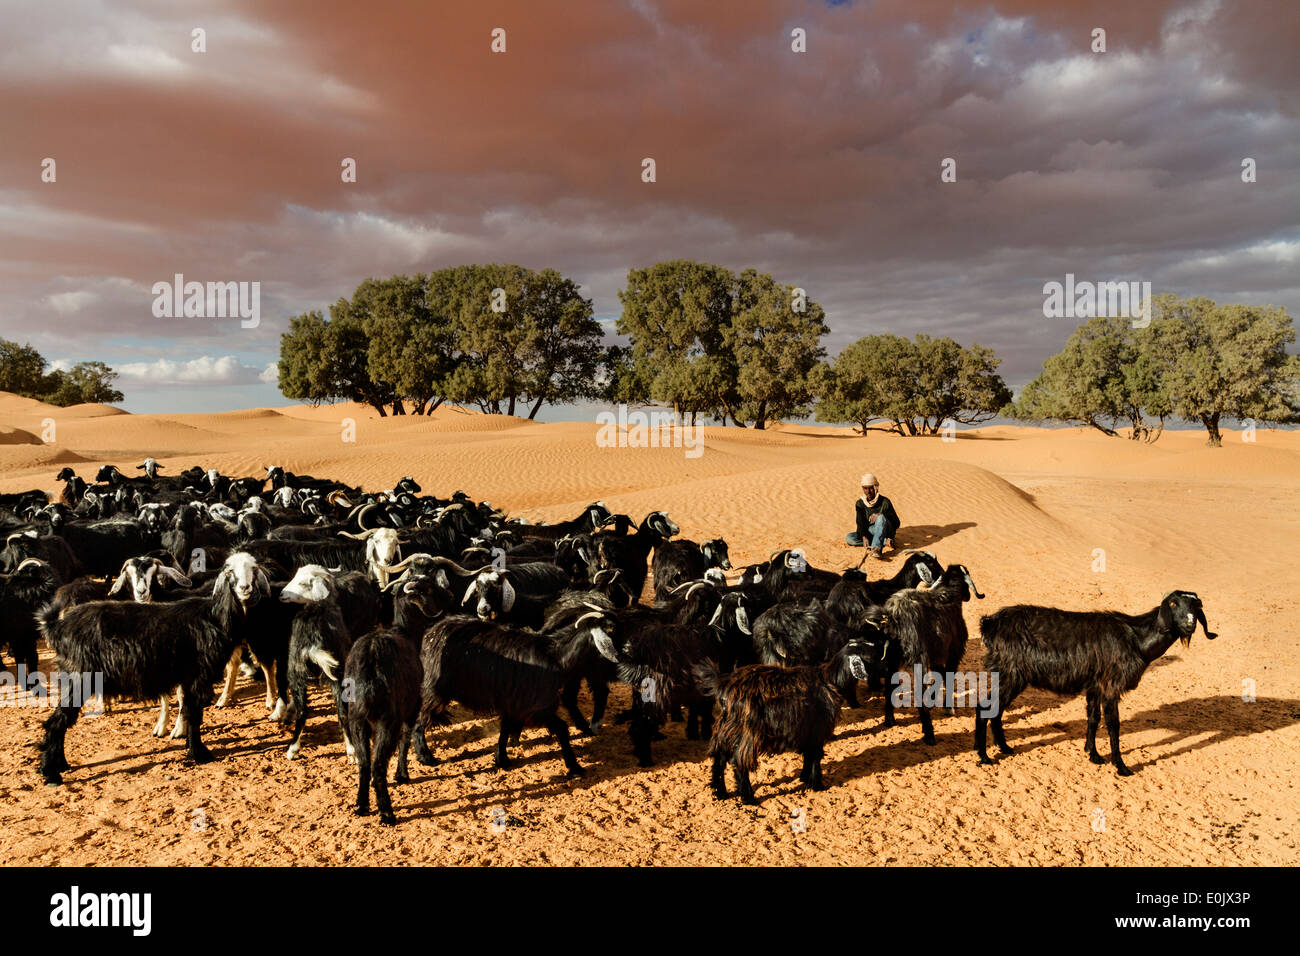 A shepherd and his flock close to the desert Stock Photo